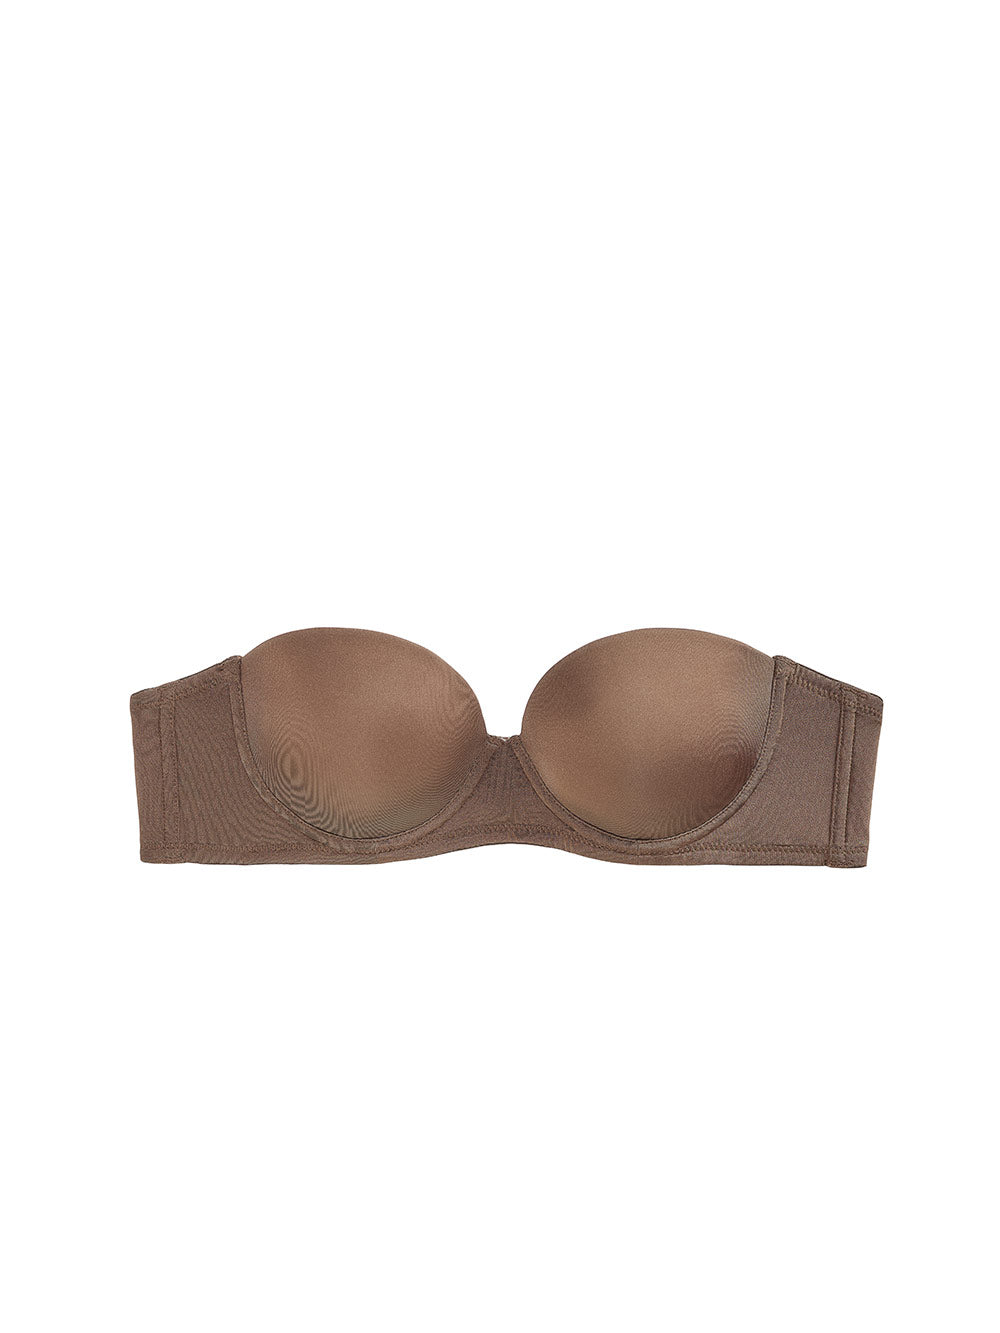 Brasier strapless  Options Intimate Colombia